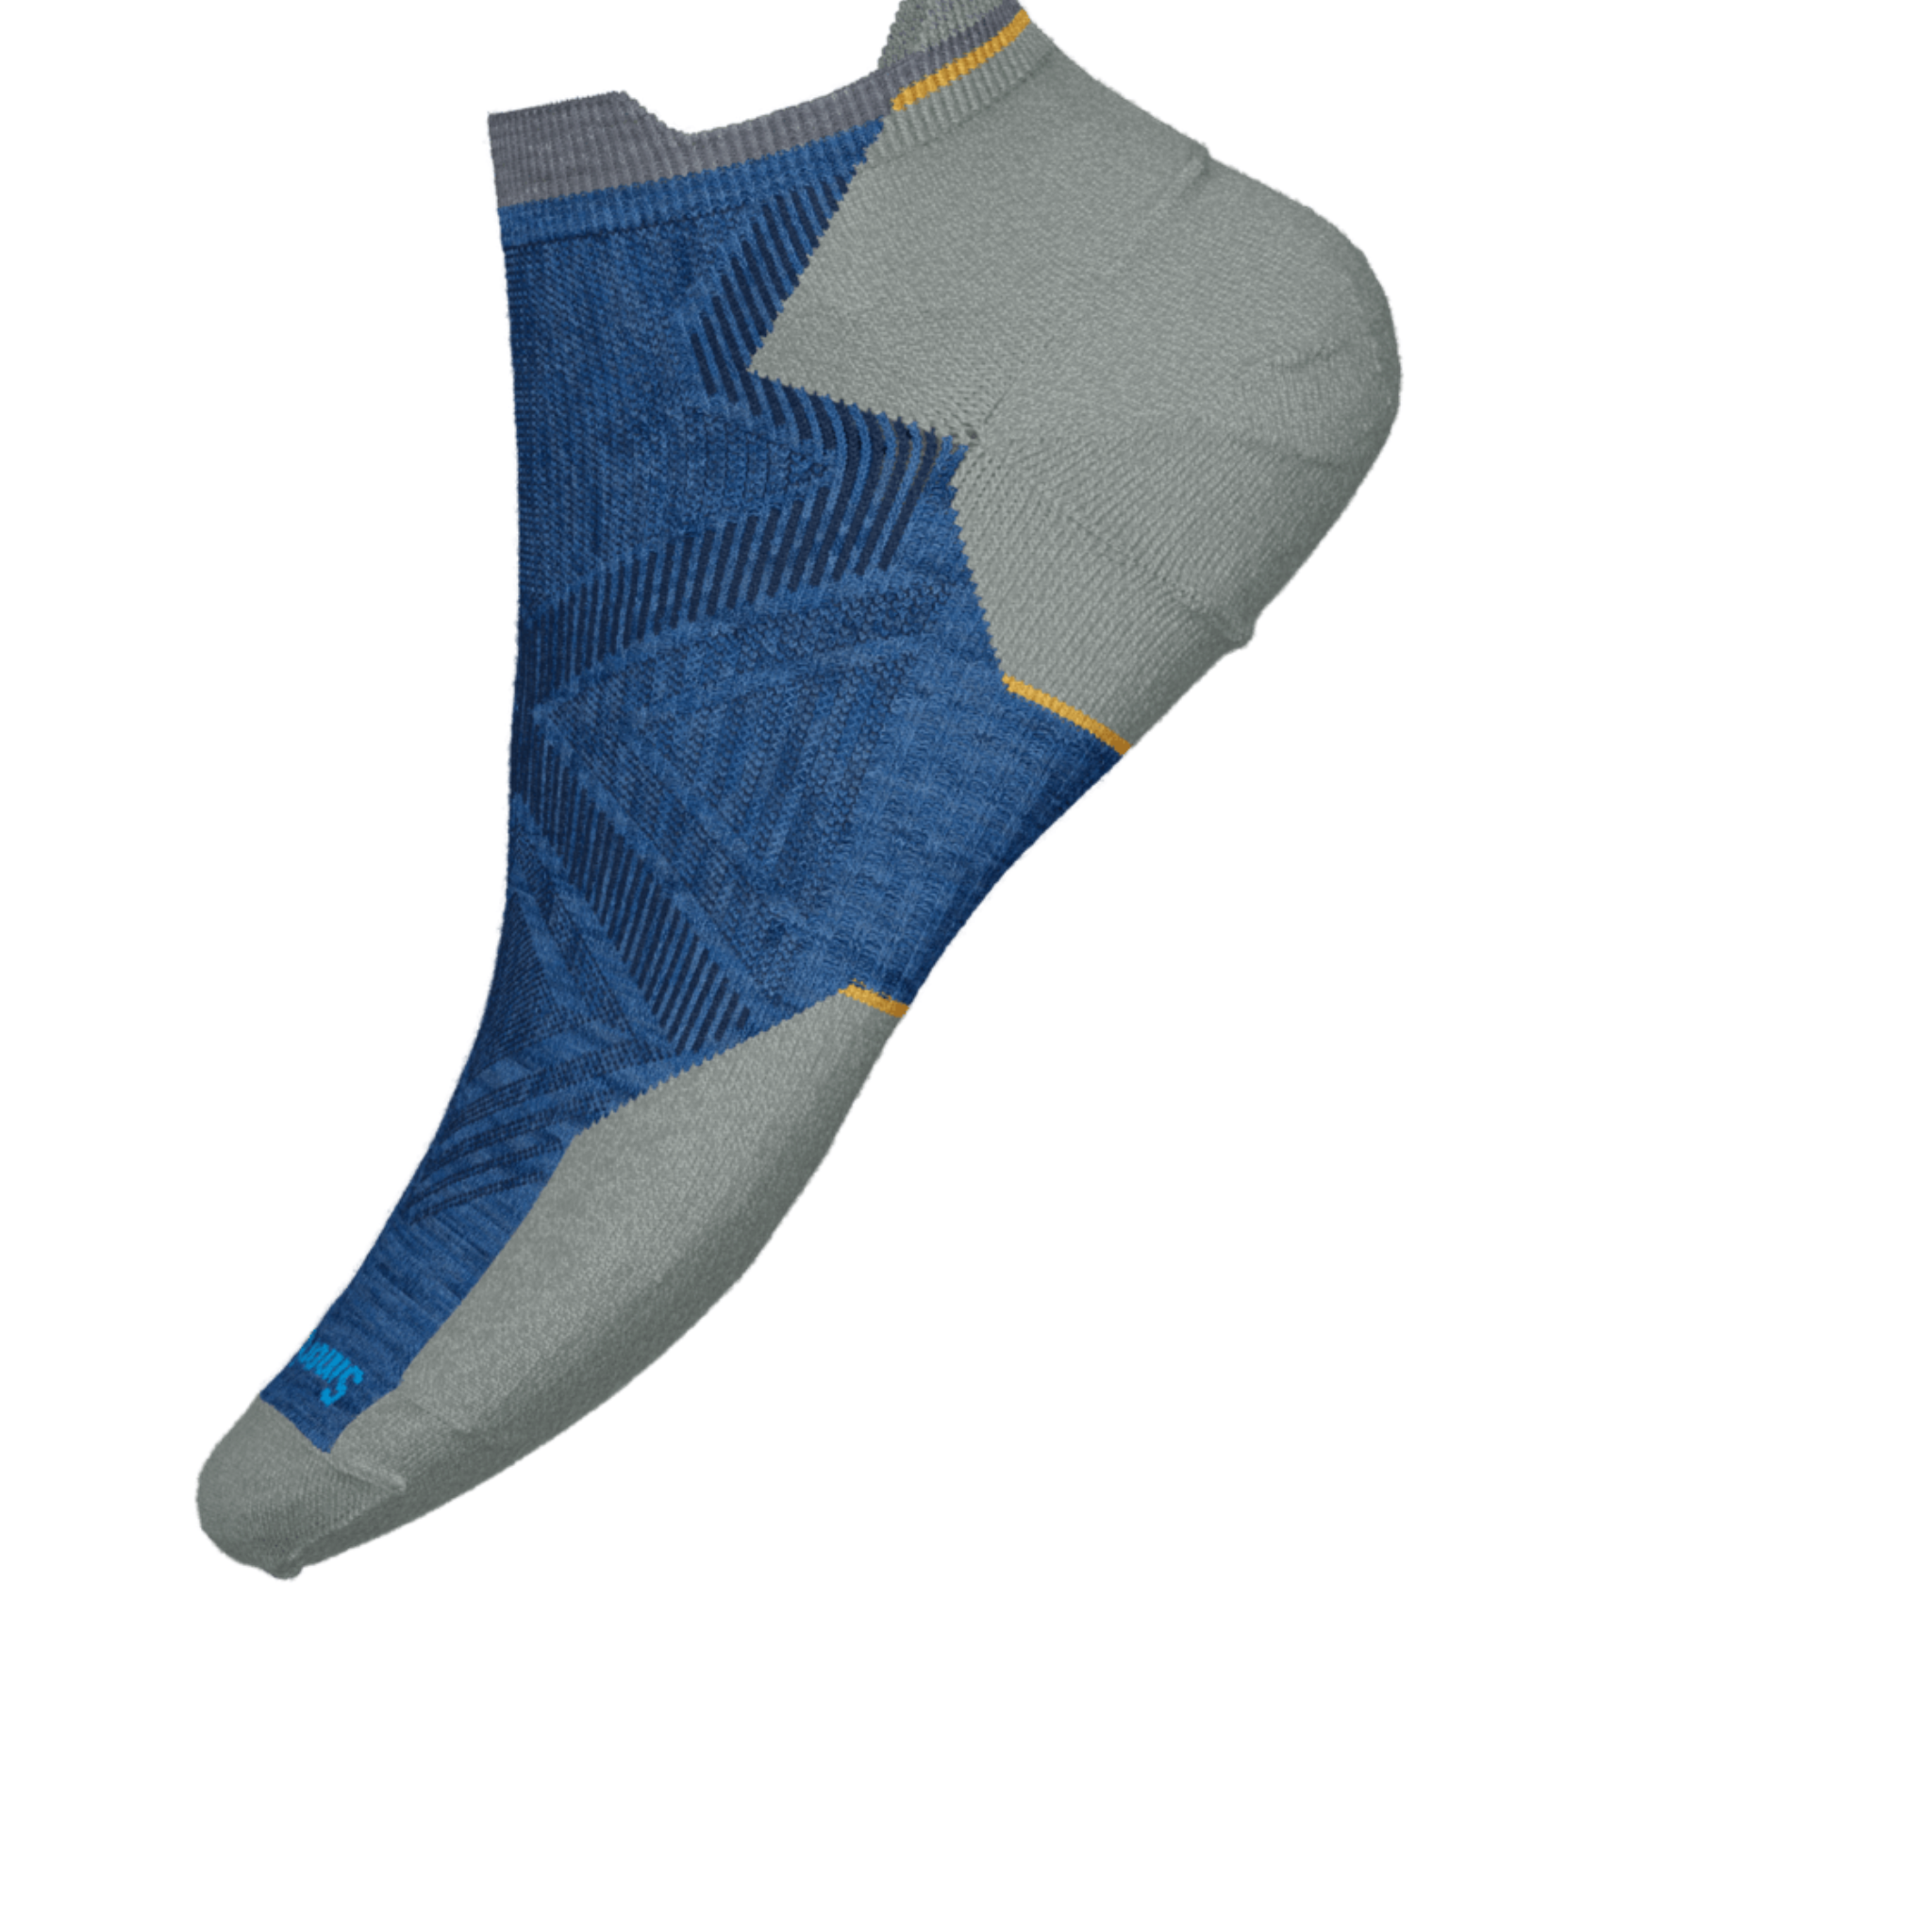 SMARTWOOL RUN TARGETED CUSHION LOW ANKLE SOCK CLEARANCE E18 NEPTUNE BLUE